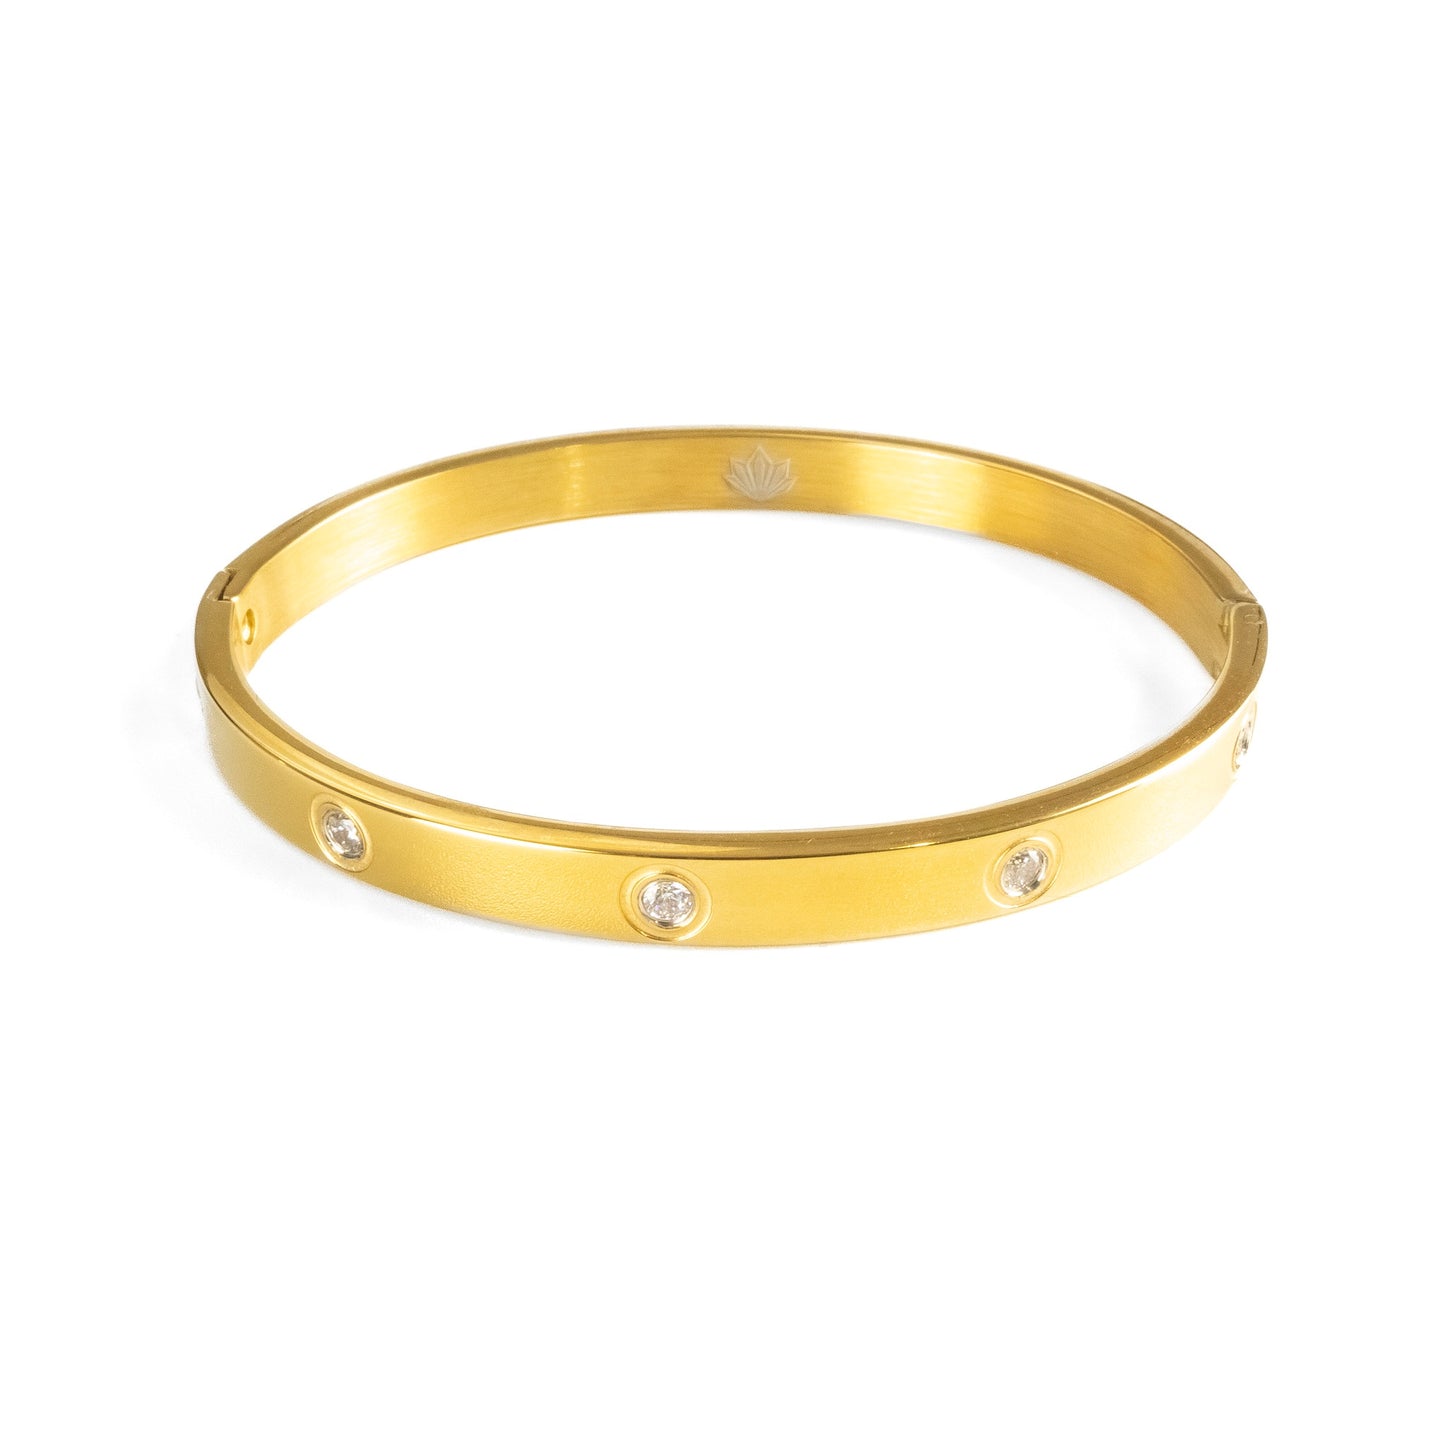 Crysttal Signature CZ Love Bangle in Gold